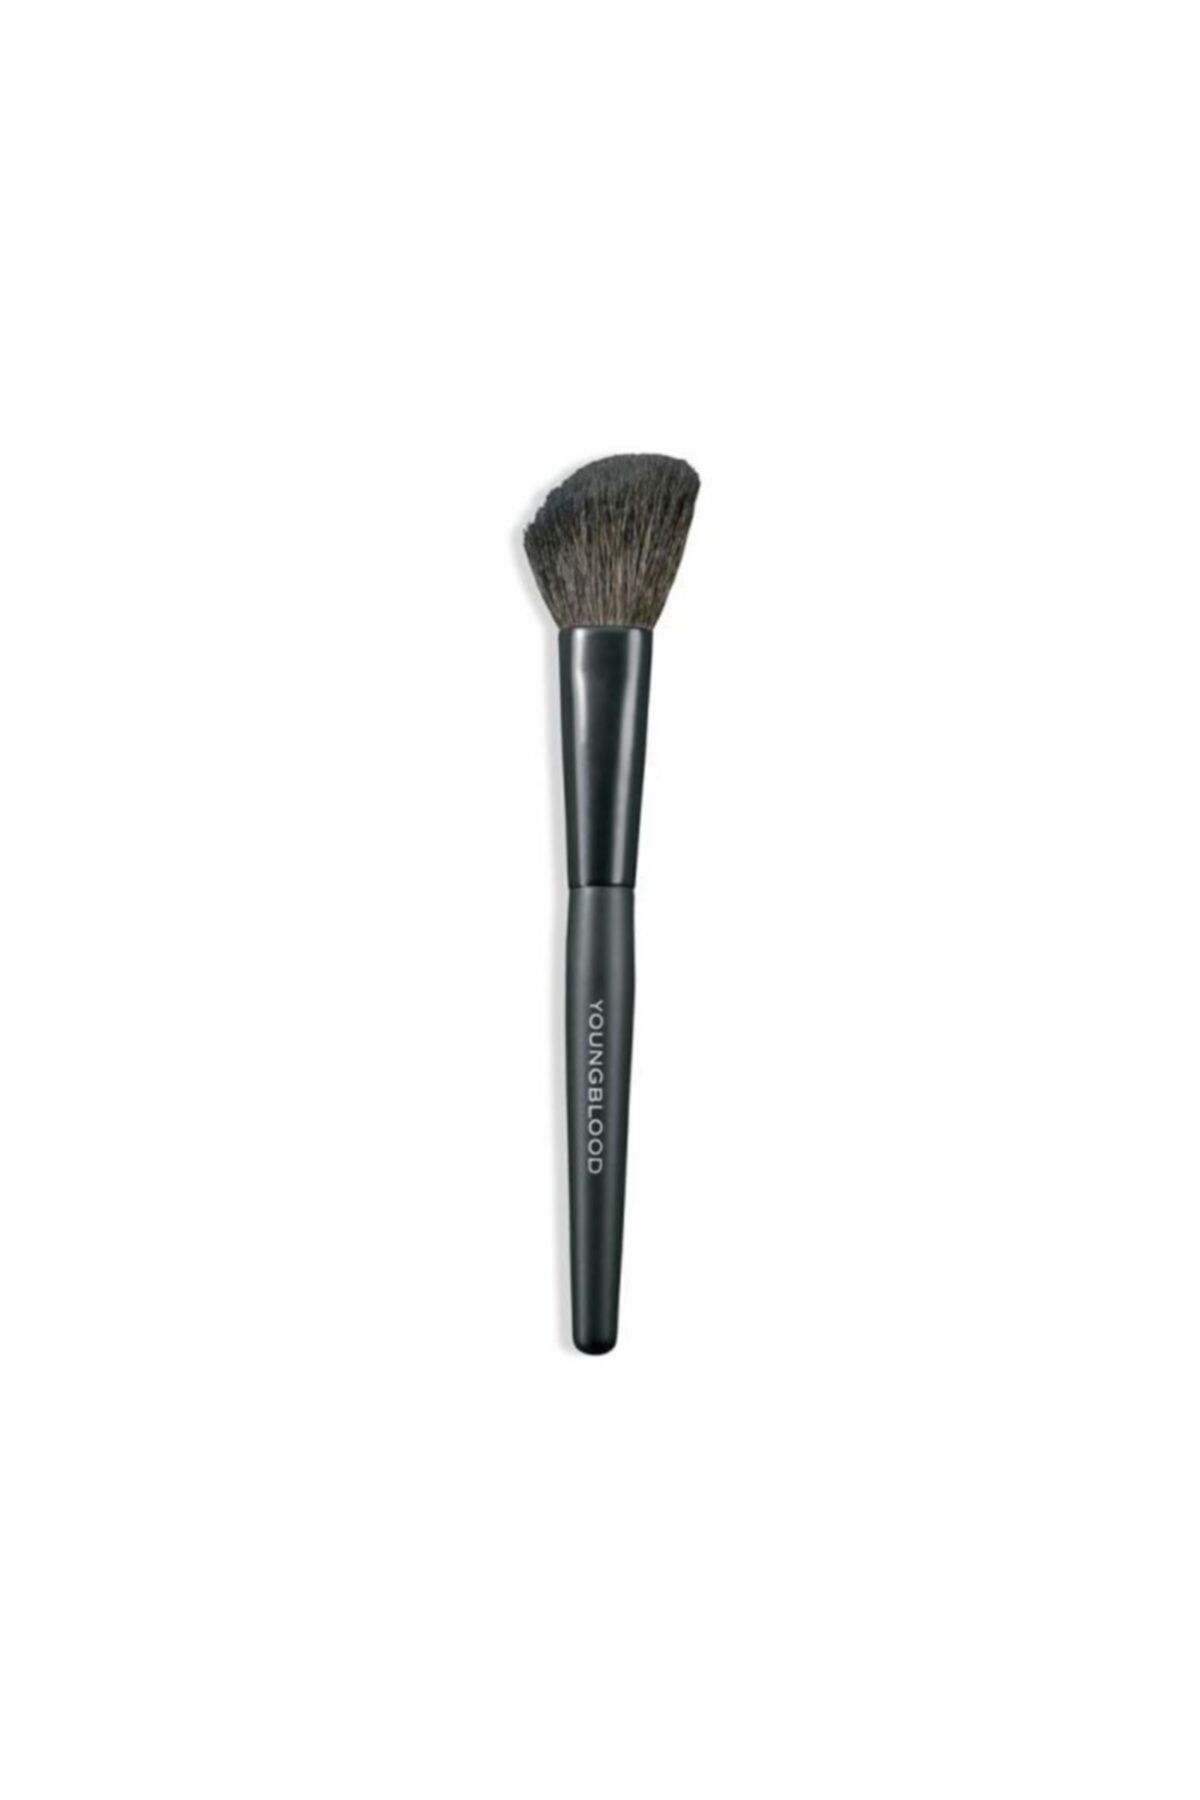 Youngblood Youngblood Brushes Contour Blush